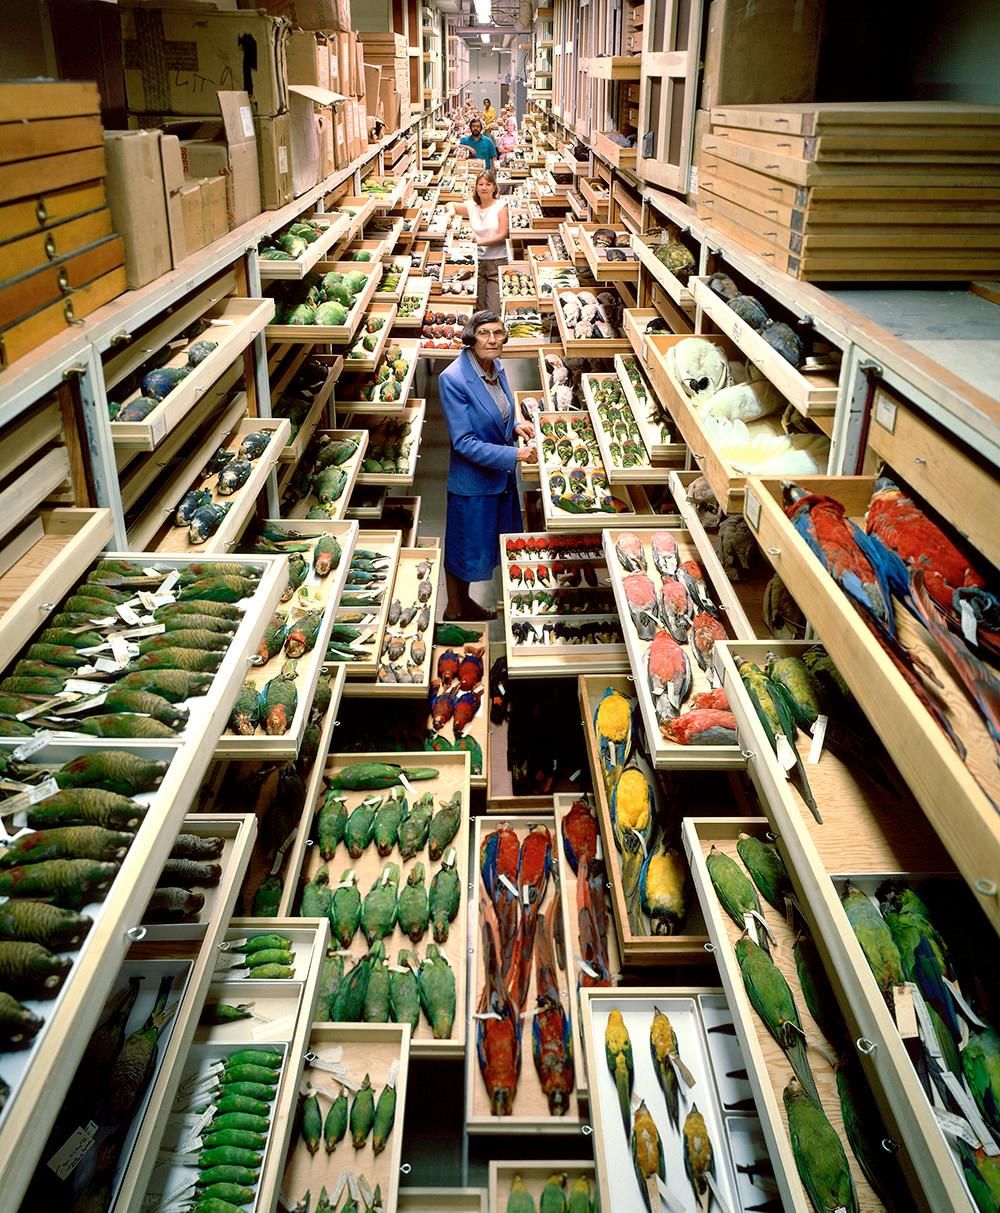 A woman in a blue coat stands surrounded by the museum's bird collection, displayed in several pulled-out drawers down a long hallway